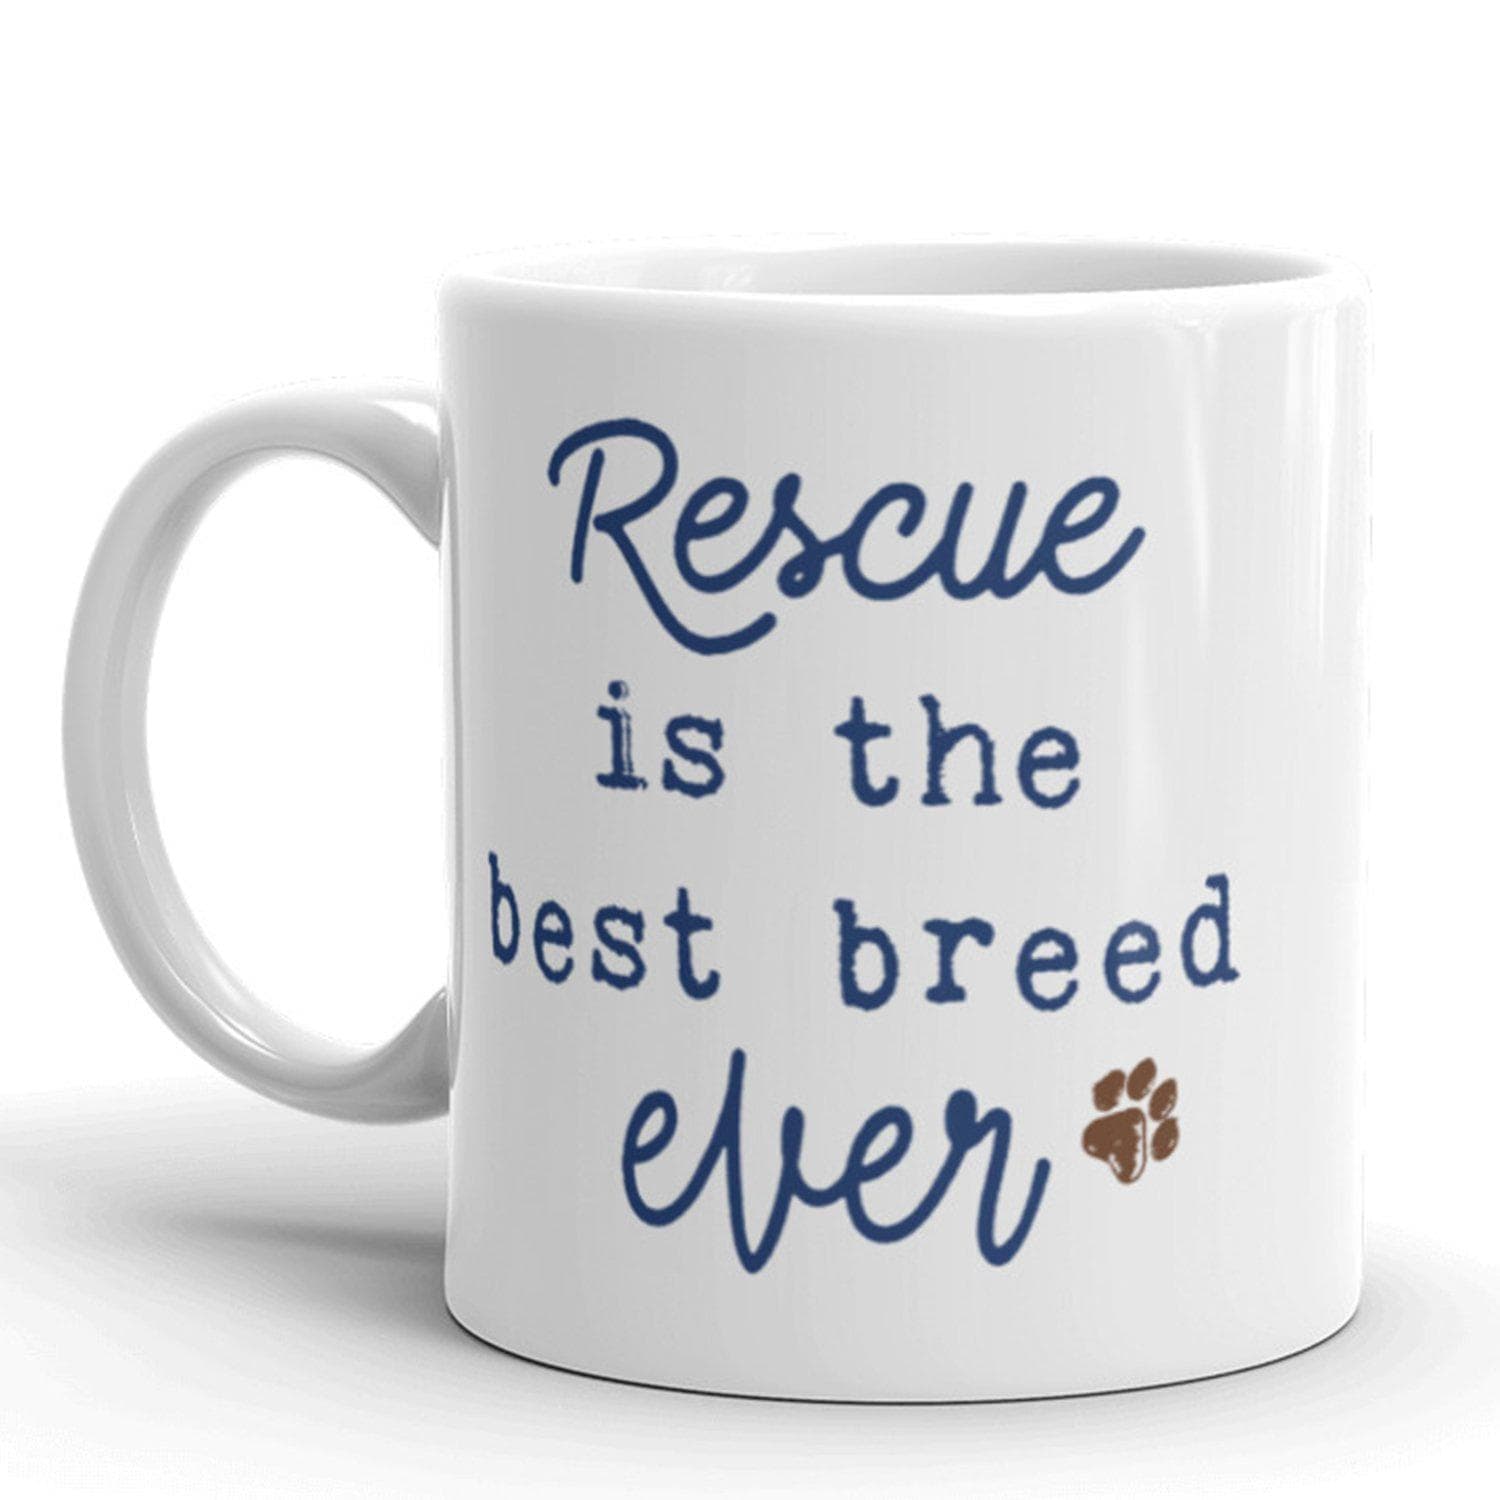 Rescue Is The Best Breed Ever Mug - Crazy Dog T-Shirts